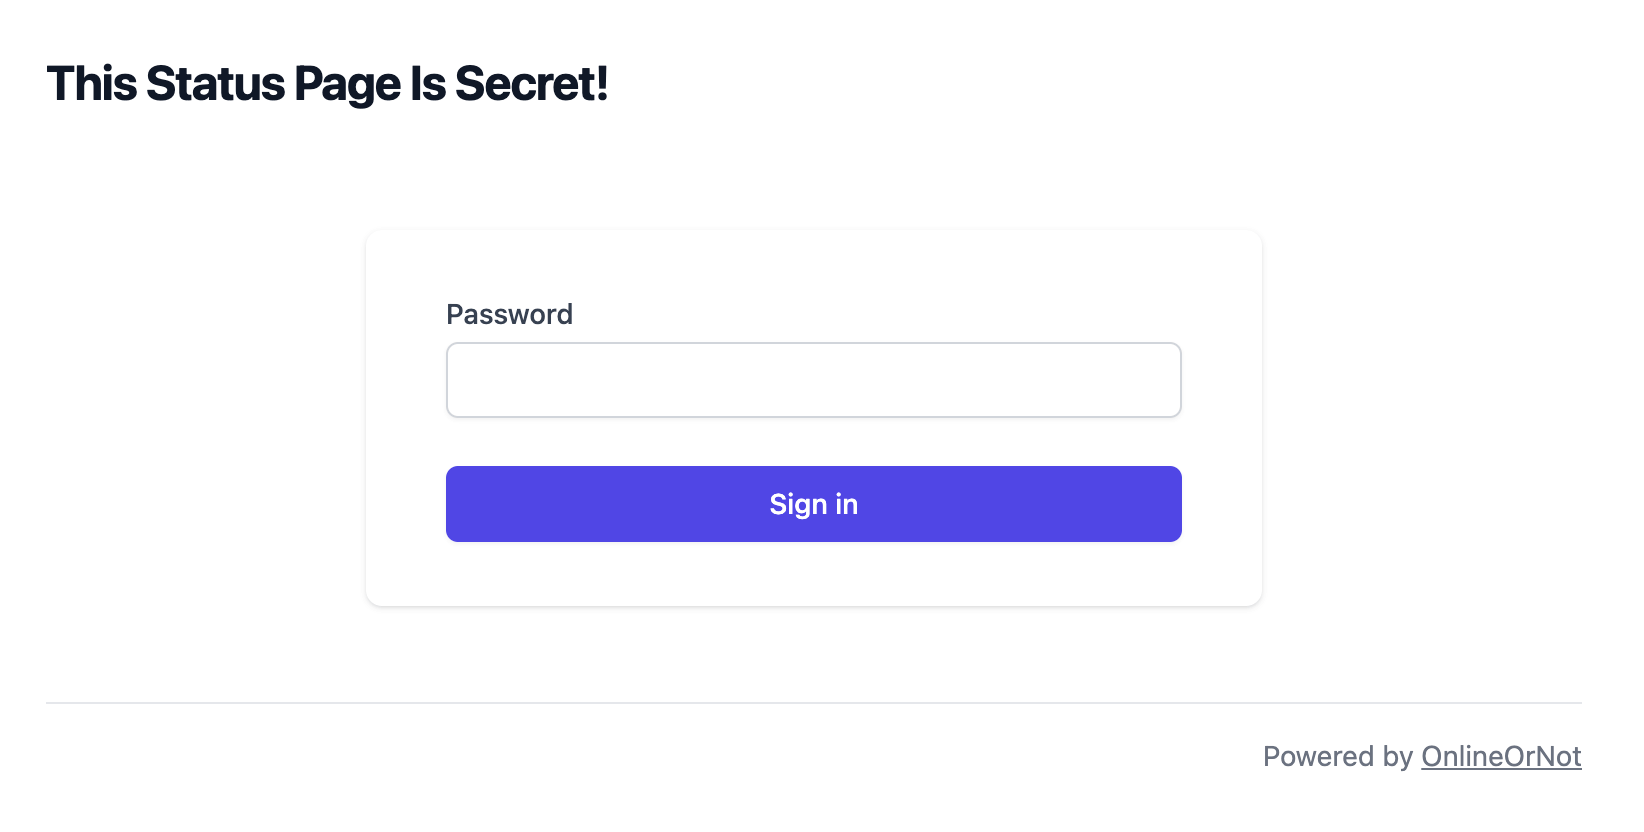 OnlineOrNot supports private status pages, that require a password to login.